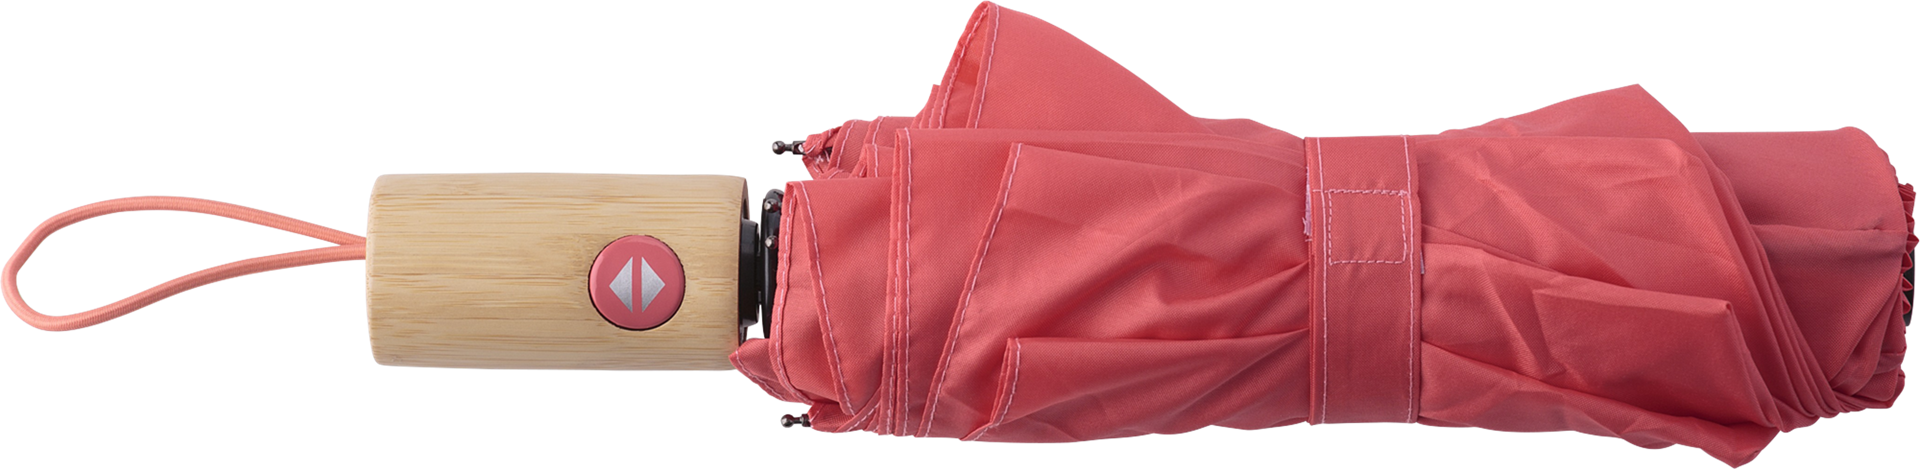 Pink umbrella on its side, with a light brown bamboo handle.